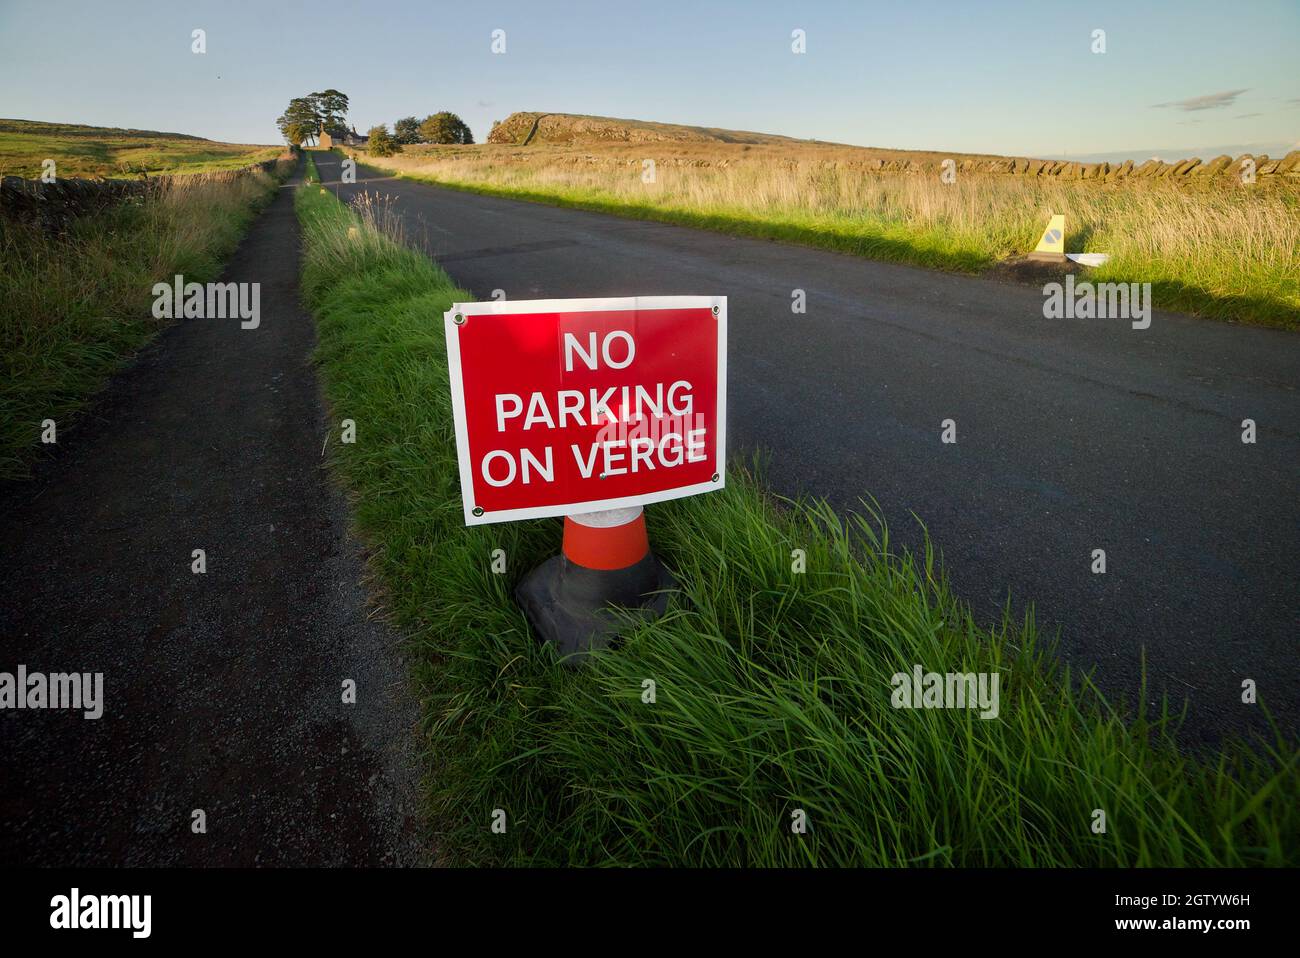 NO PARKING ON VERGE sign post along a small English country road. A temporary road sign asking drivers not to park on the road verge side. Stock Photo